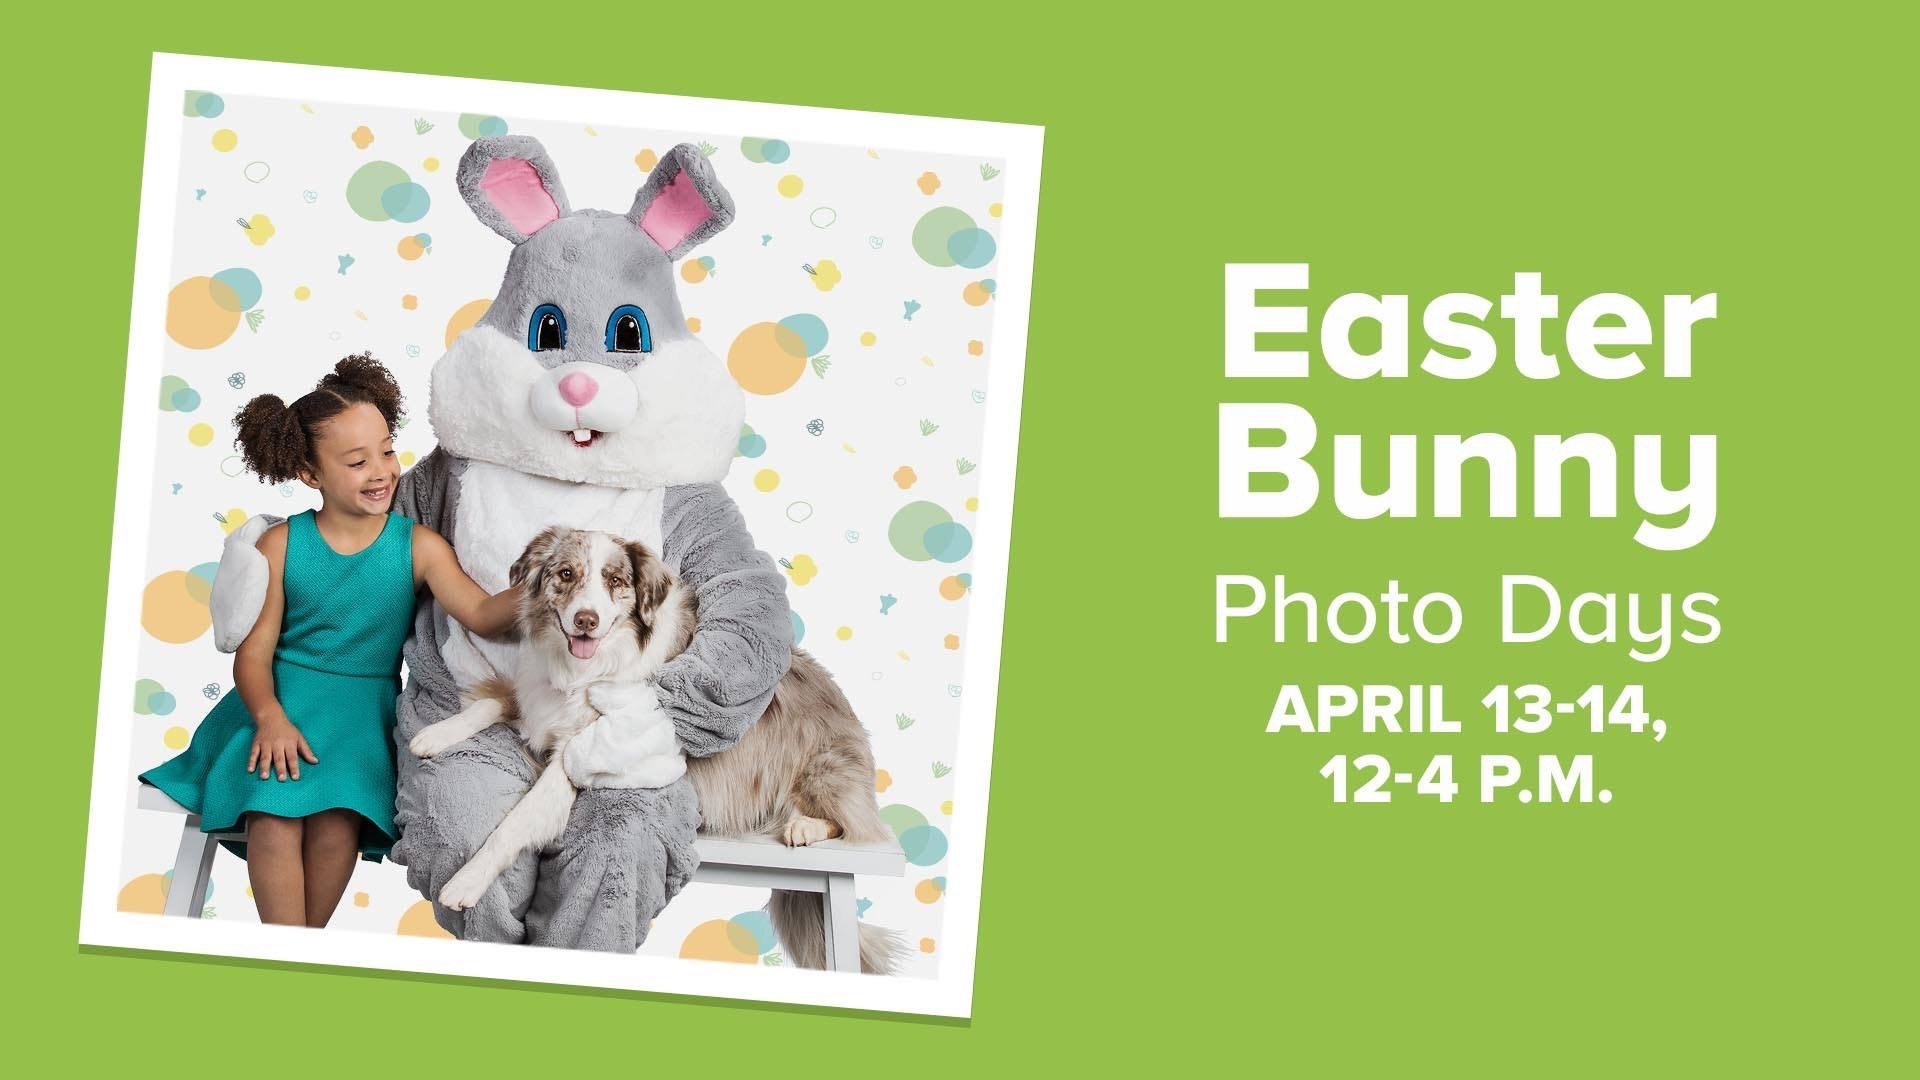 PetSmart offering free Easter photos for pets